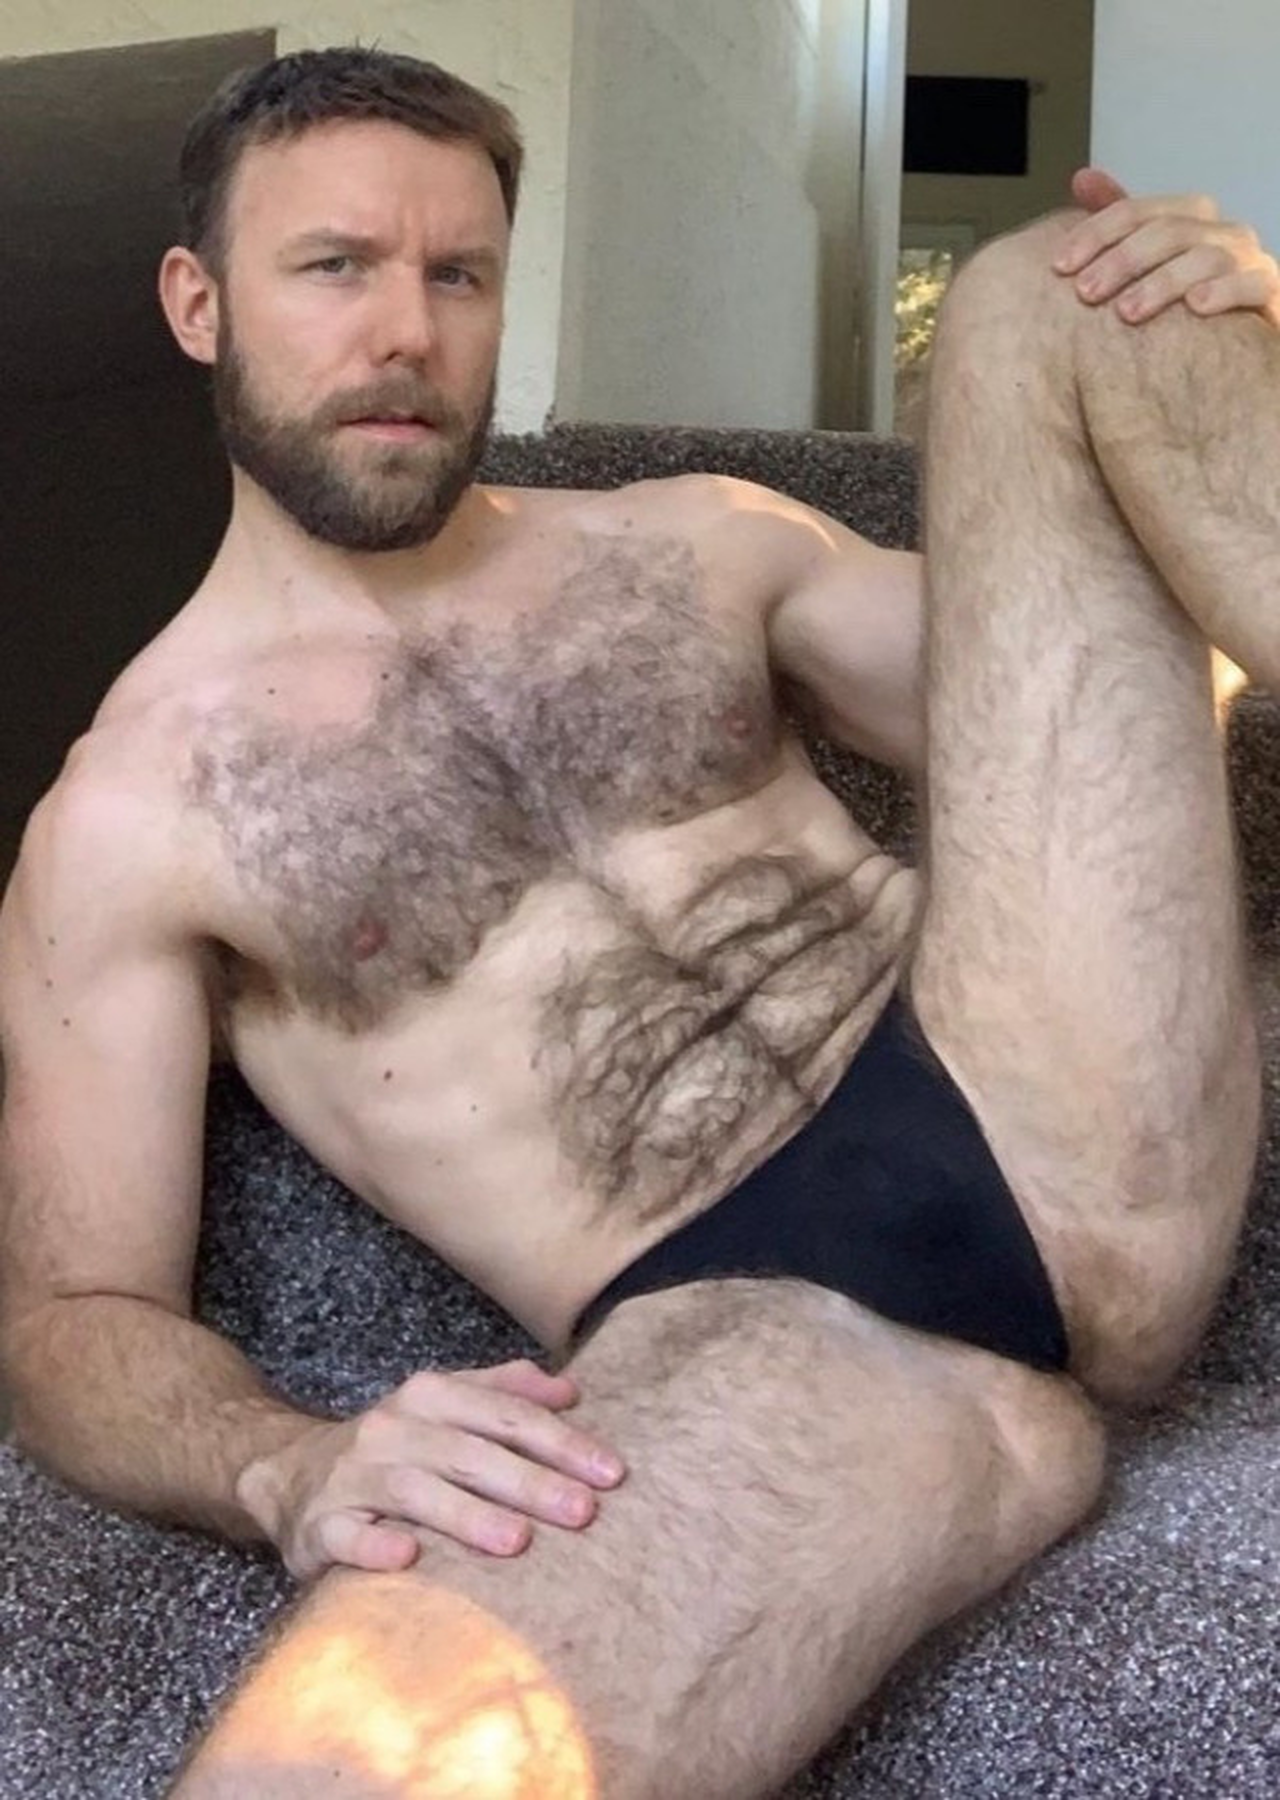 Photo by Smitty with the username @Resol702,  August 4, 2020 at 11:43 PM. The post is about the topic Gay Hairy Men